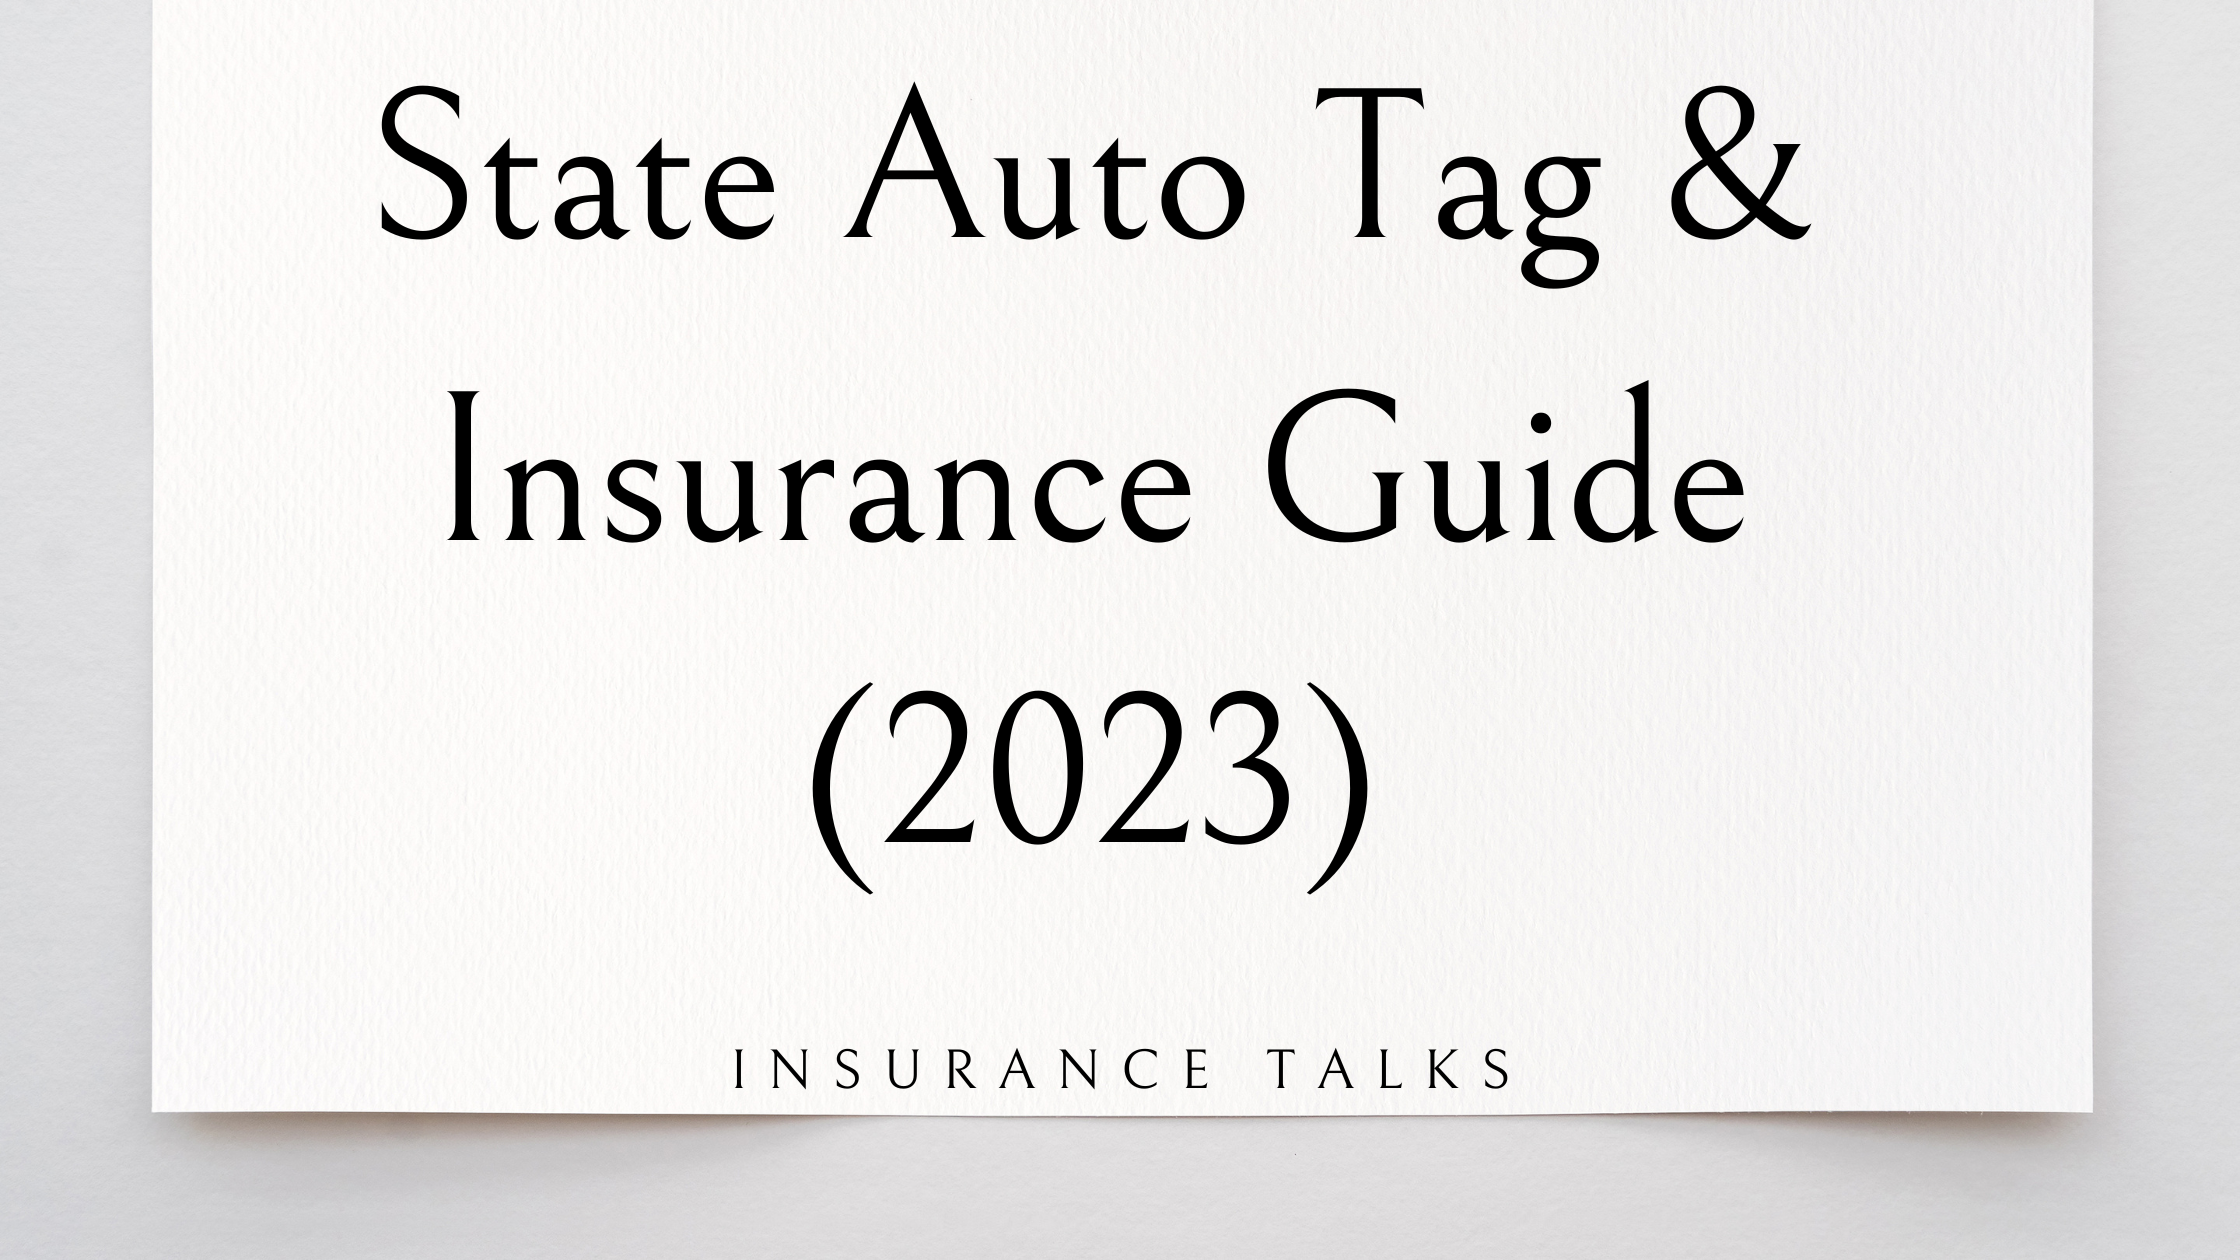 State Auto Tag & Insurance Guide (2023)